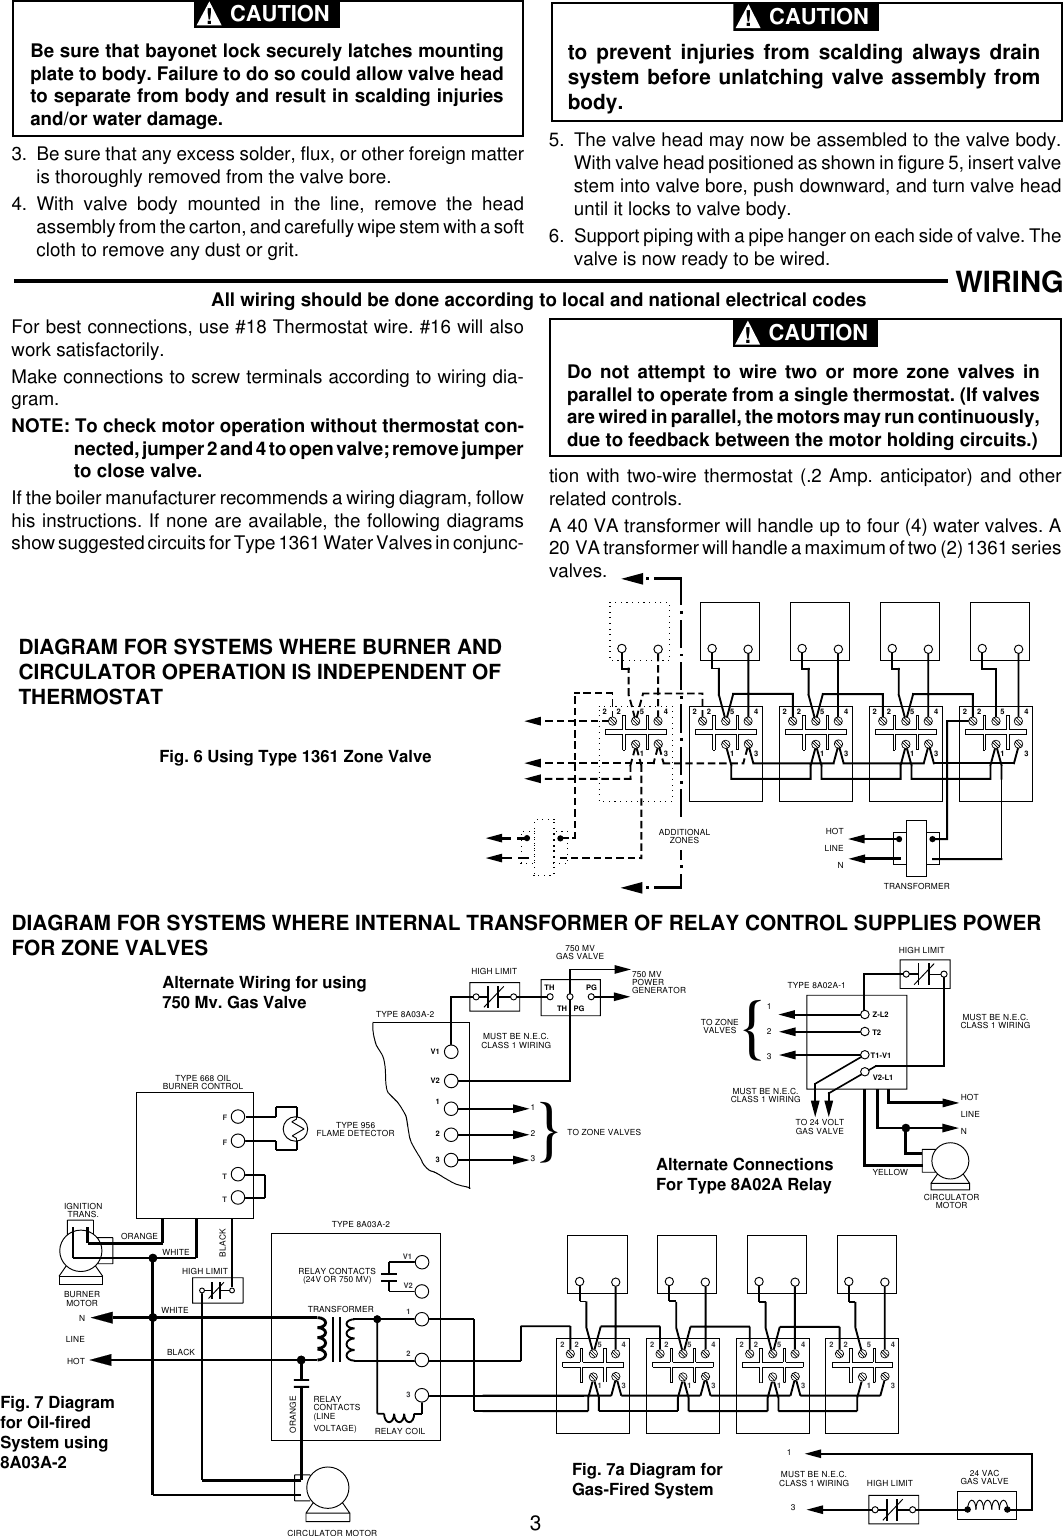 Page 3 of 8 - White-Rodgers White-Rodgers-1361-104-Hydronic-Zone-Controls-Installation-Instructions- 37-5422B (1361)  White-rodgers-1361-104-hydronic-zone-controls-installation-instructions